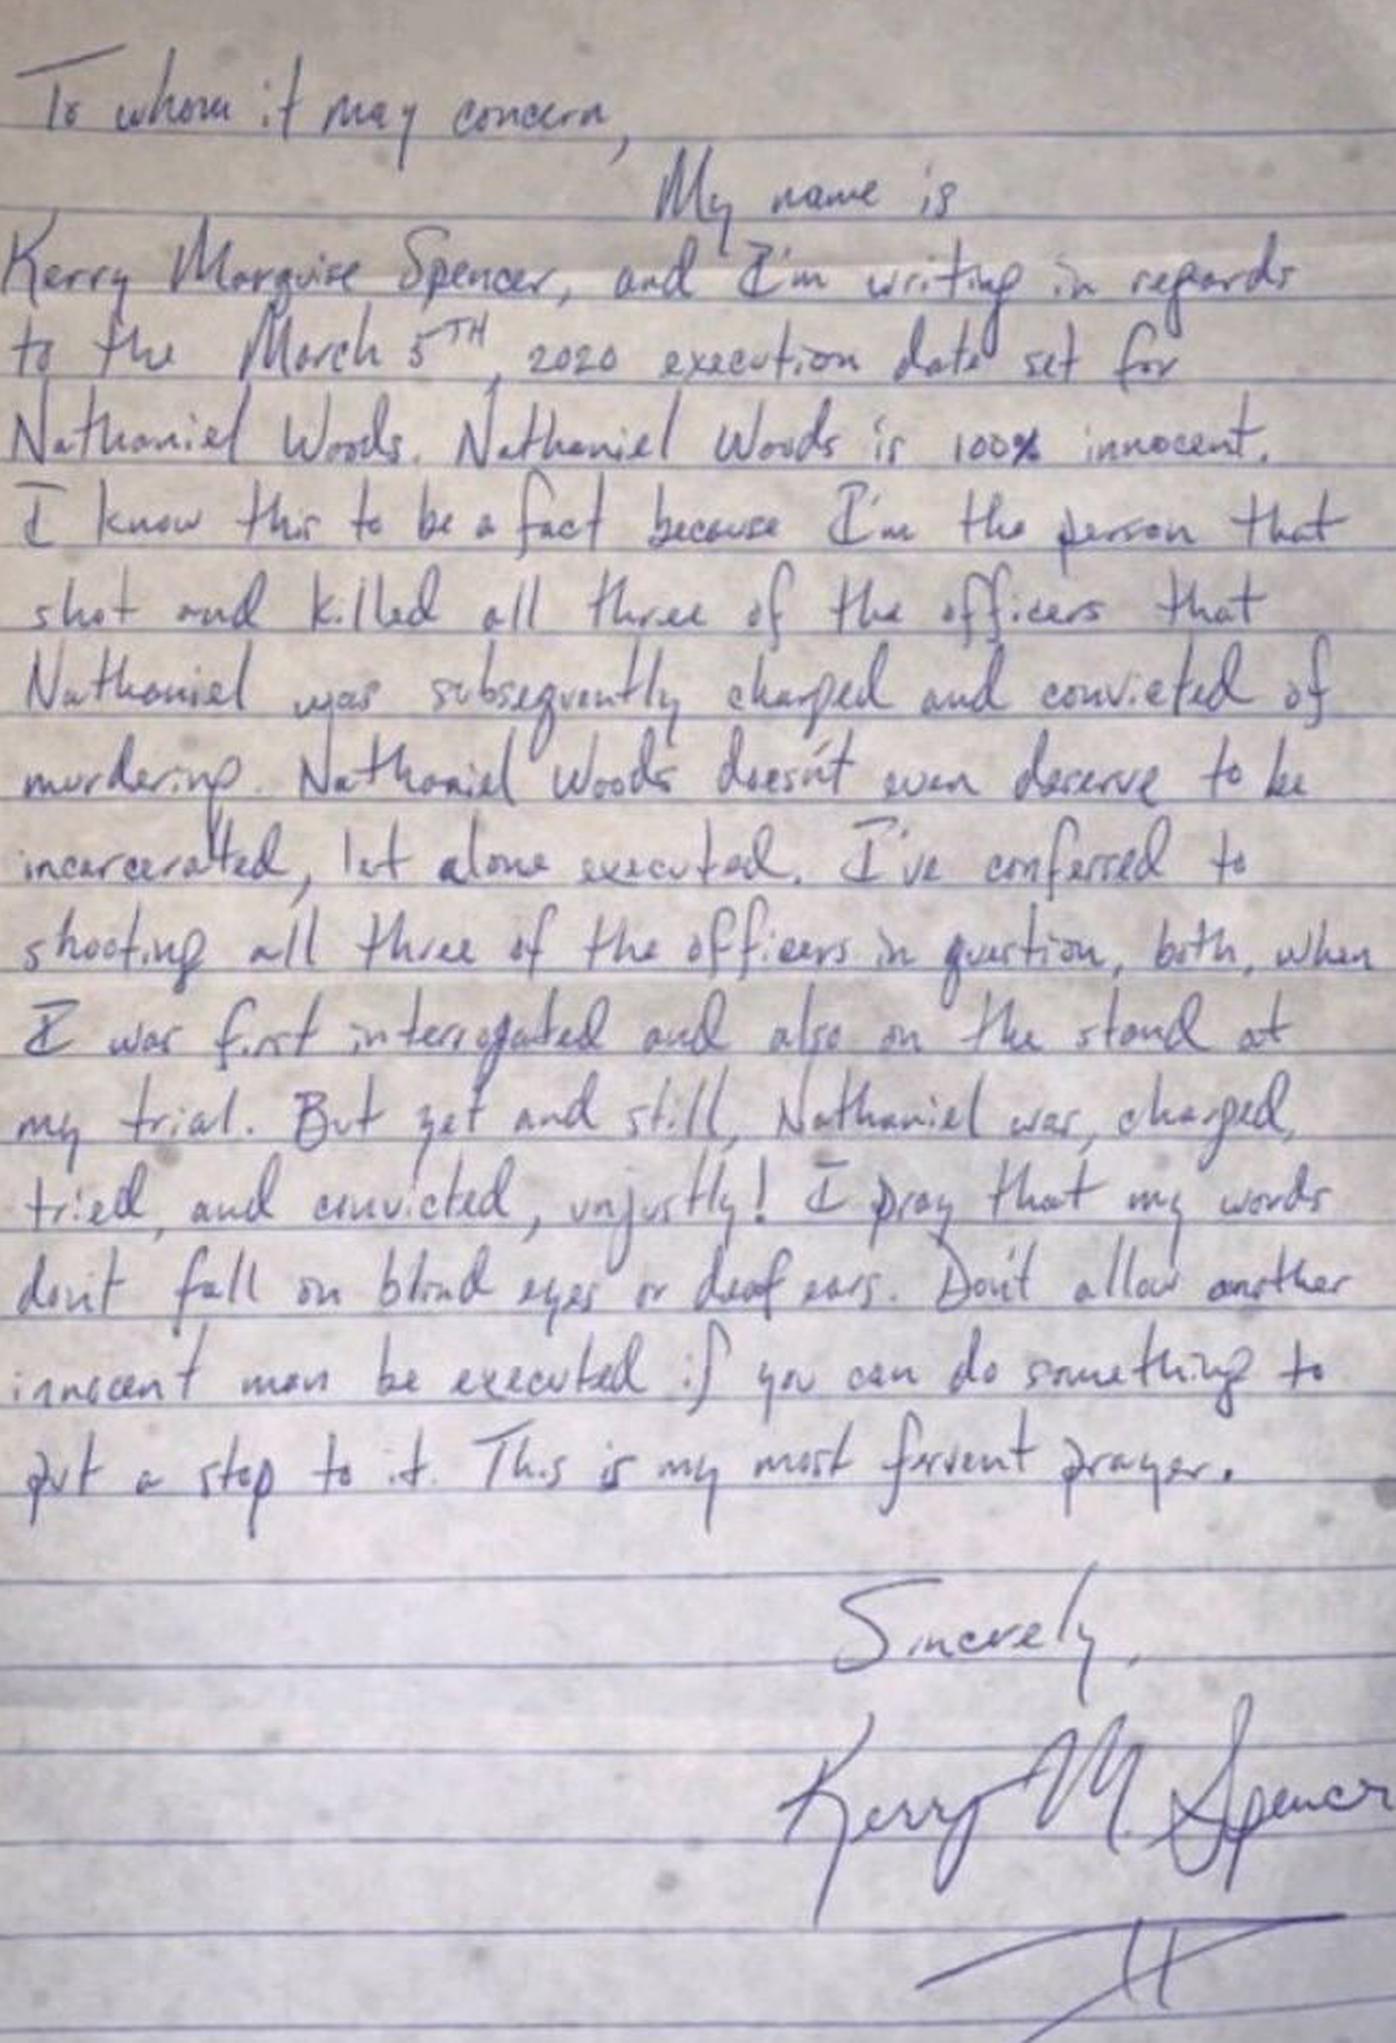 A letter from Kerry Spencer claiming Woods' innocence.